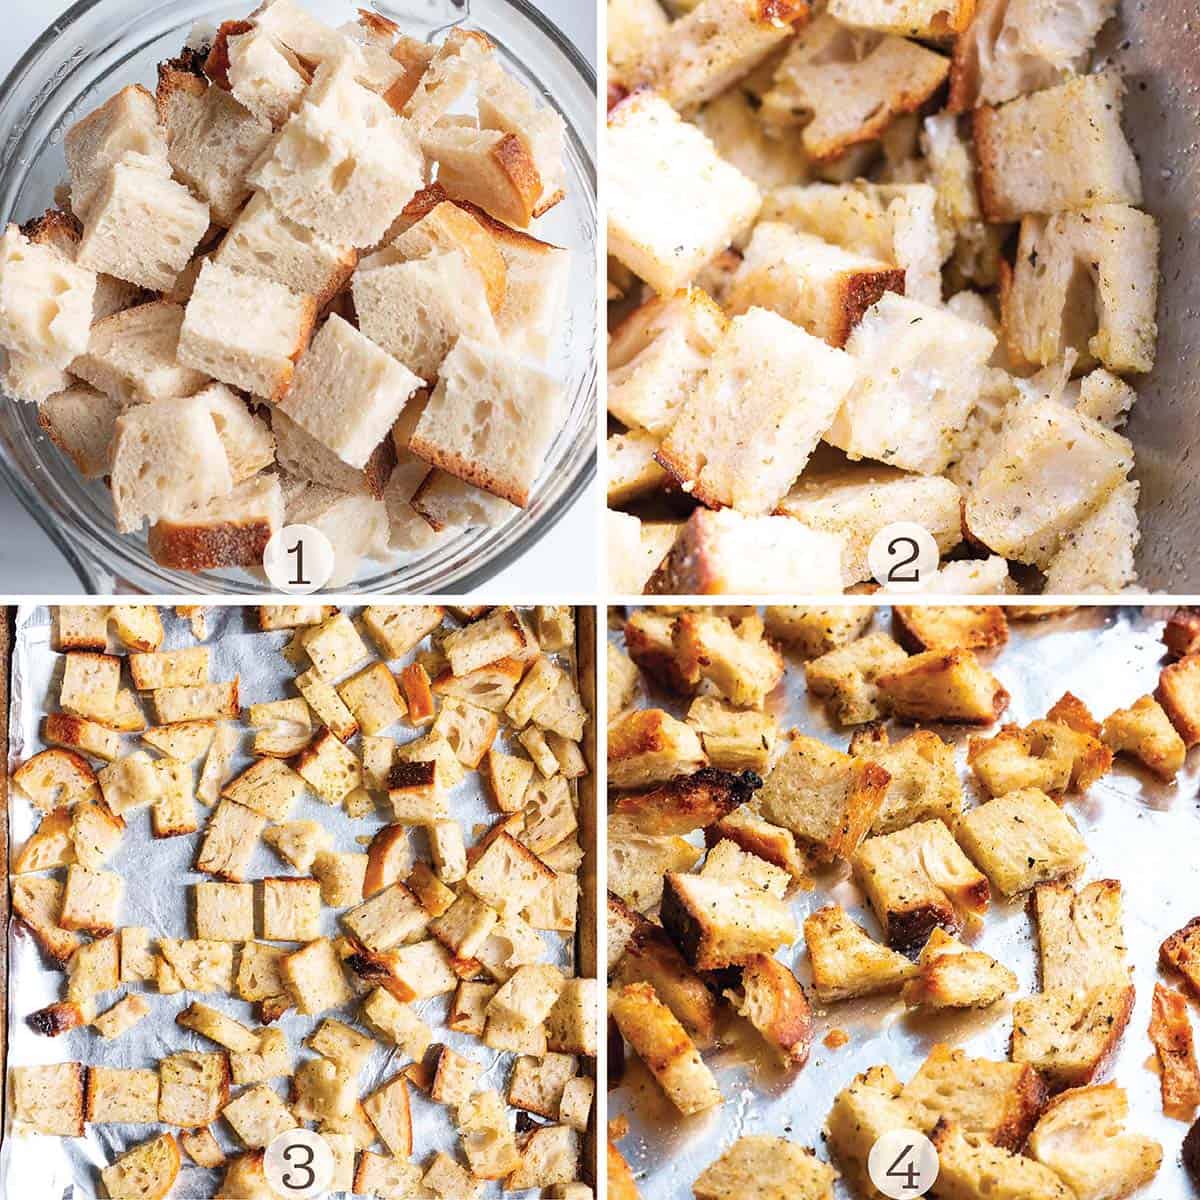 Step by step process to making homemade croutons.